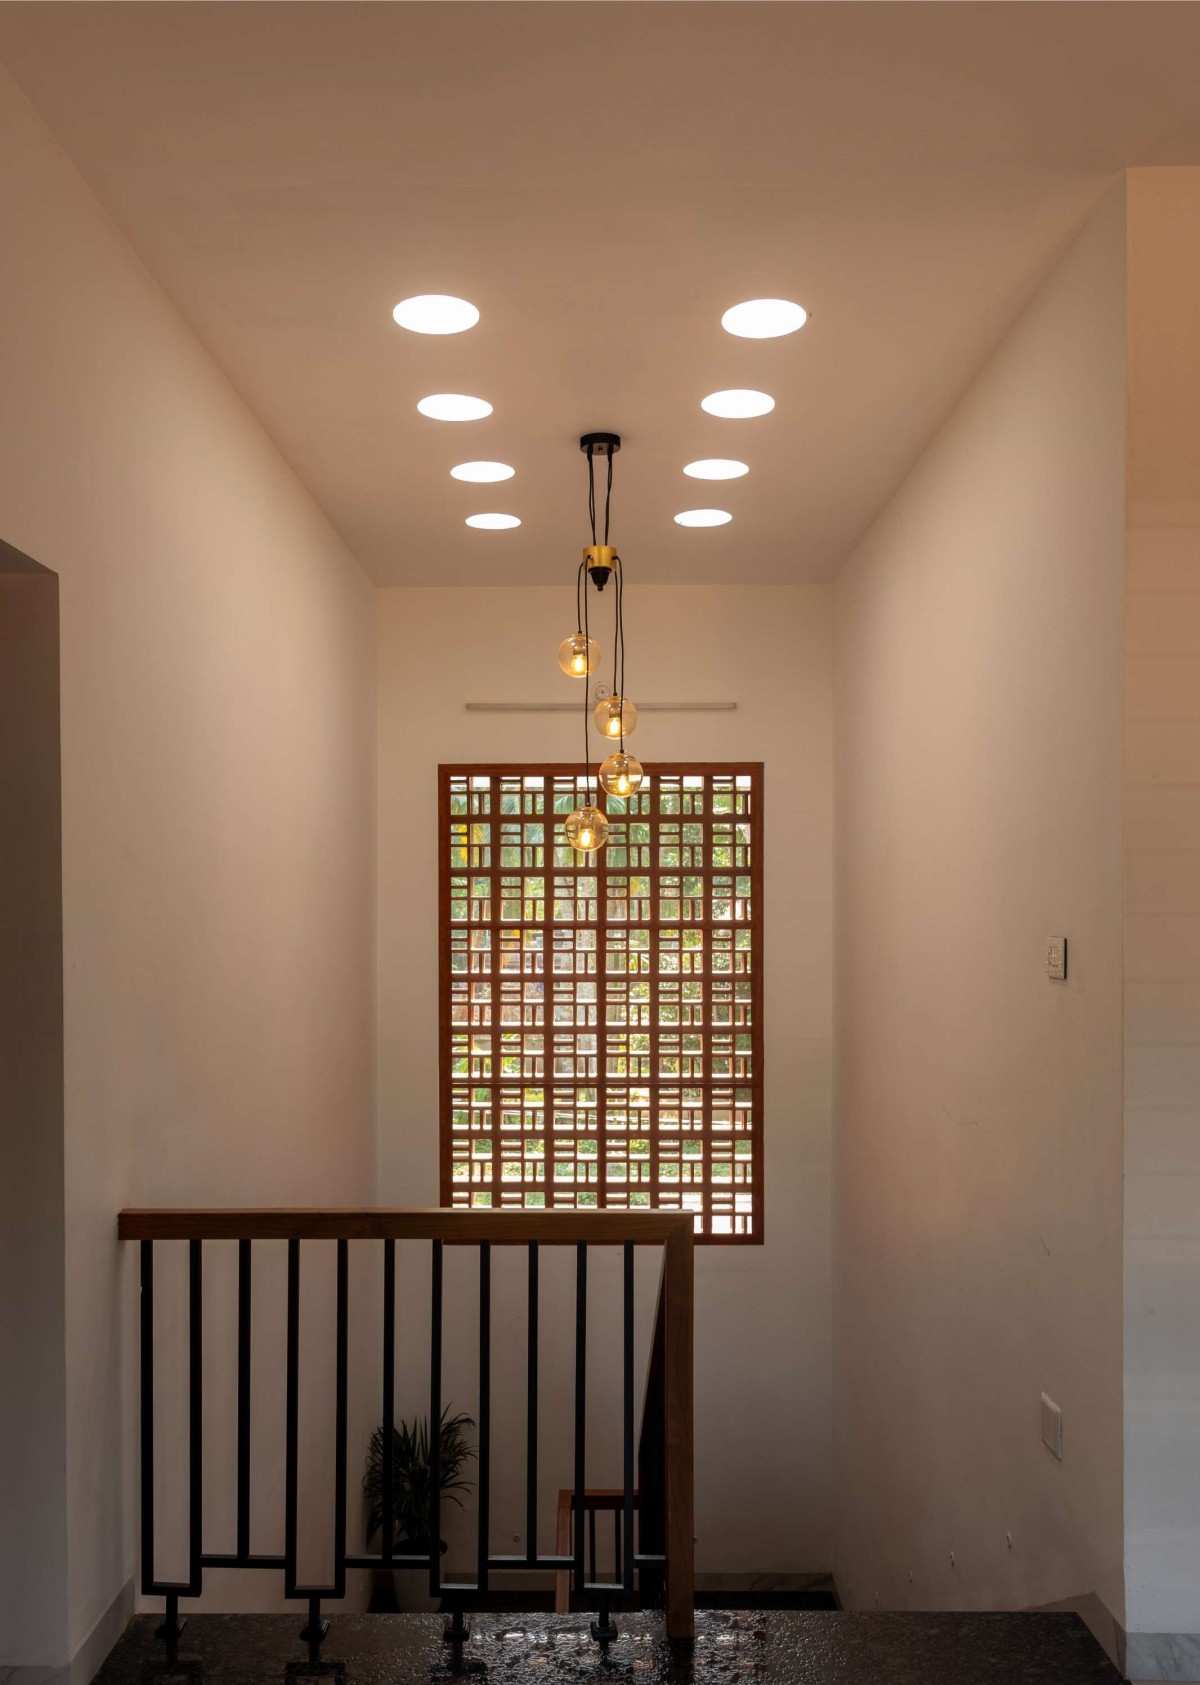 Skylight and Chandelier of Vrindavanam by Stria Architects